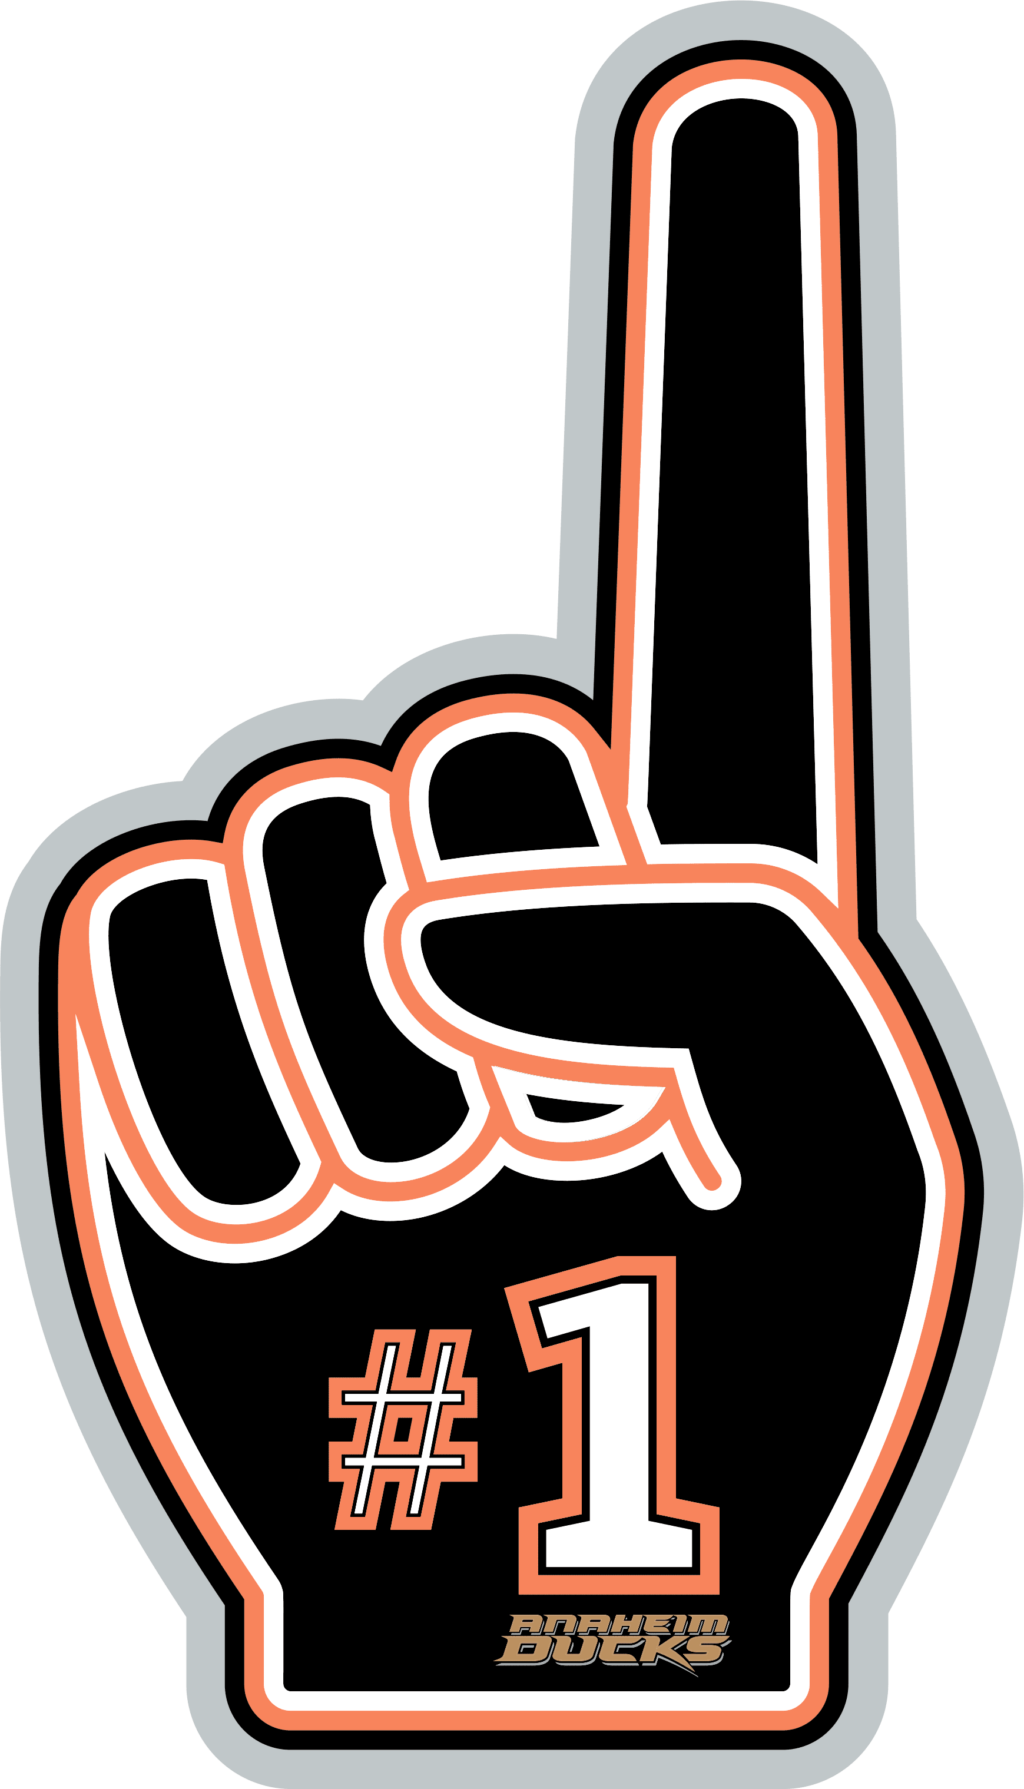 ducks 12 NHL Logo Anaheim Ducks, Anaheim Ducks SVG Vector, Anaheim Ducks Clipart, Anaheim Ducks Ice Hockey Kit SVG, DXF, PNG, EPS Instant download NHL-Files for silhouette, files for clipping.